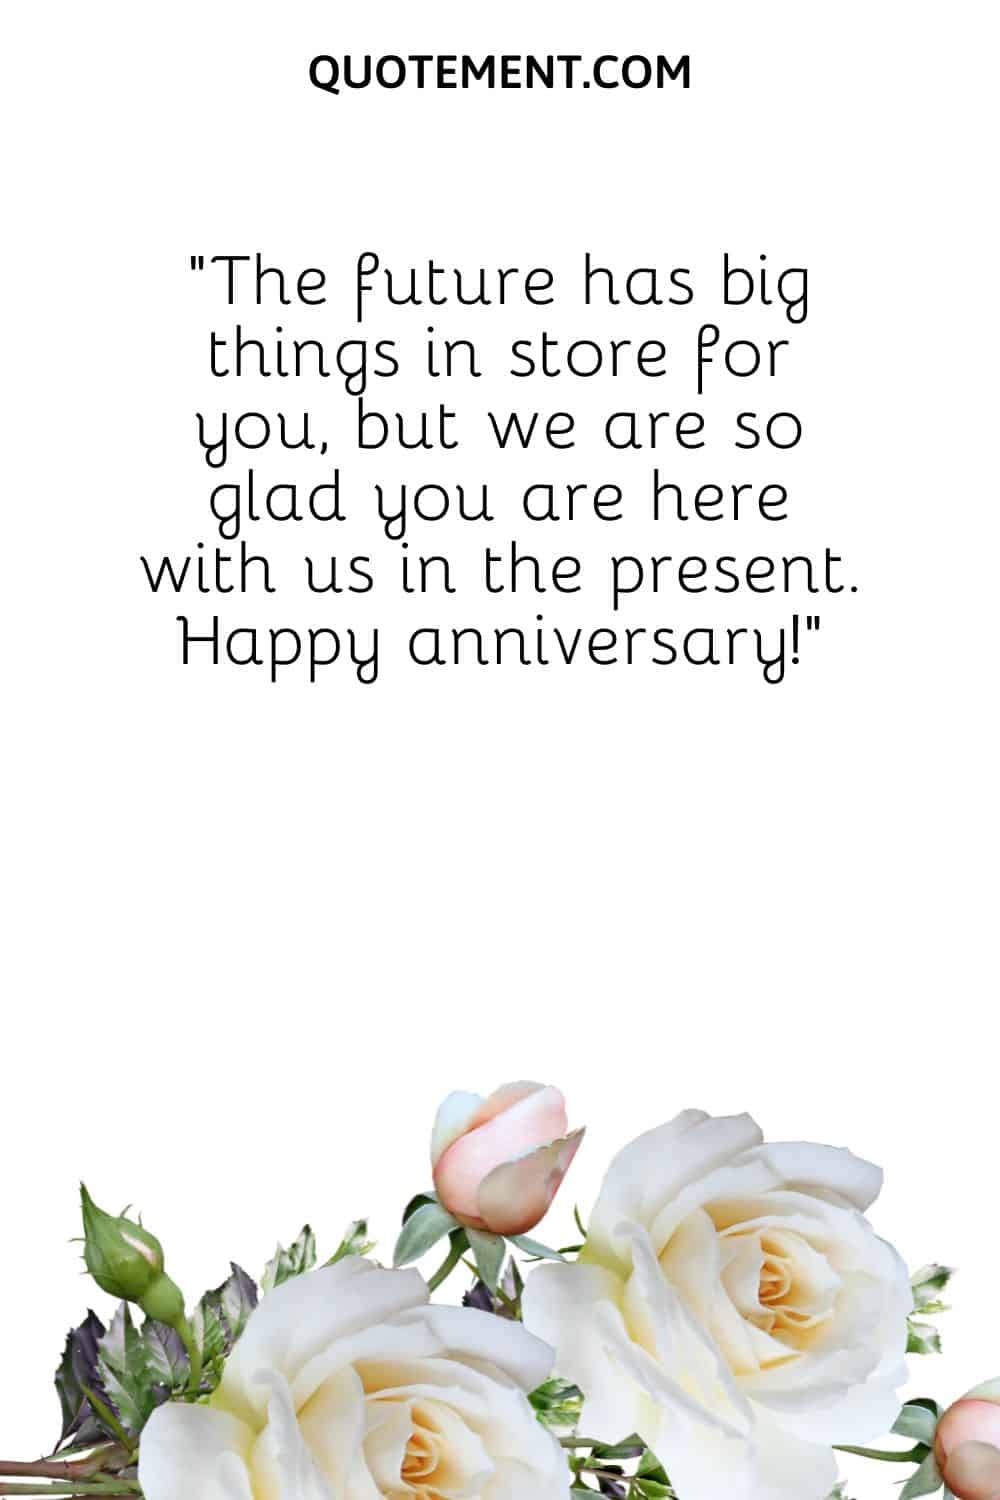 “The future has big things in store for you, but we are so glad you are here with us in the present. Happy anniversary!”